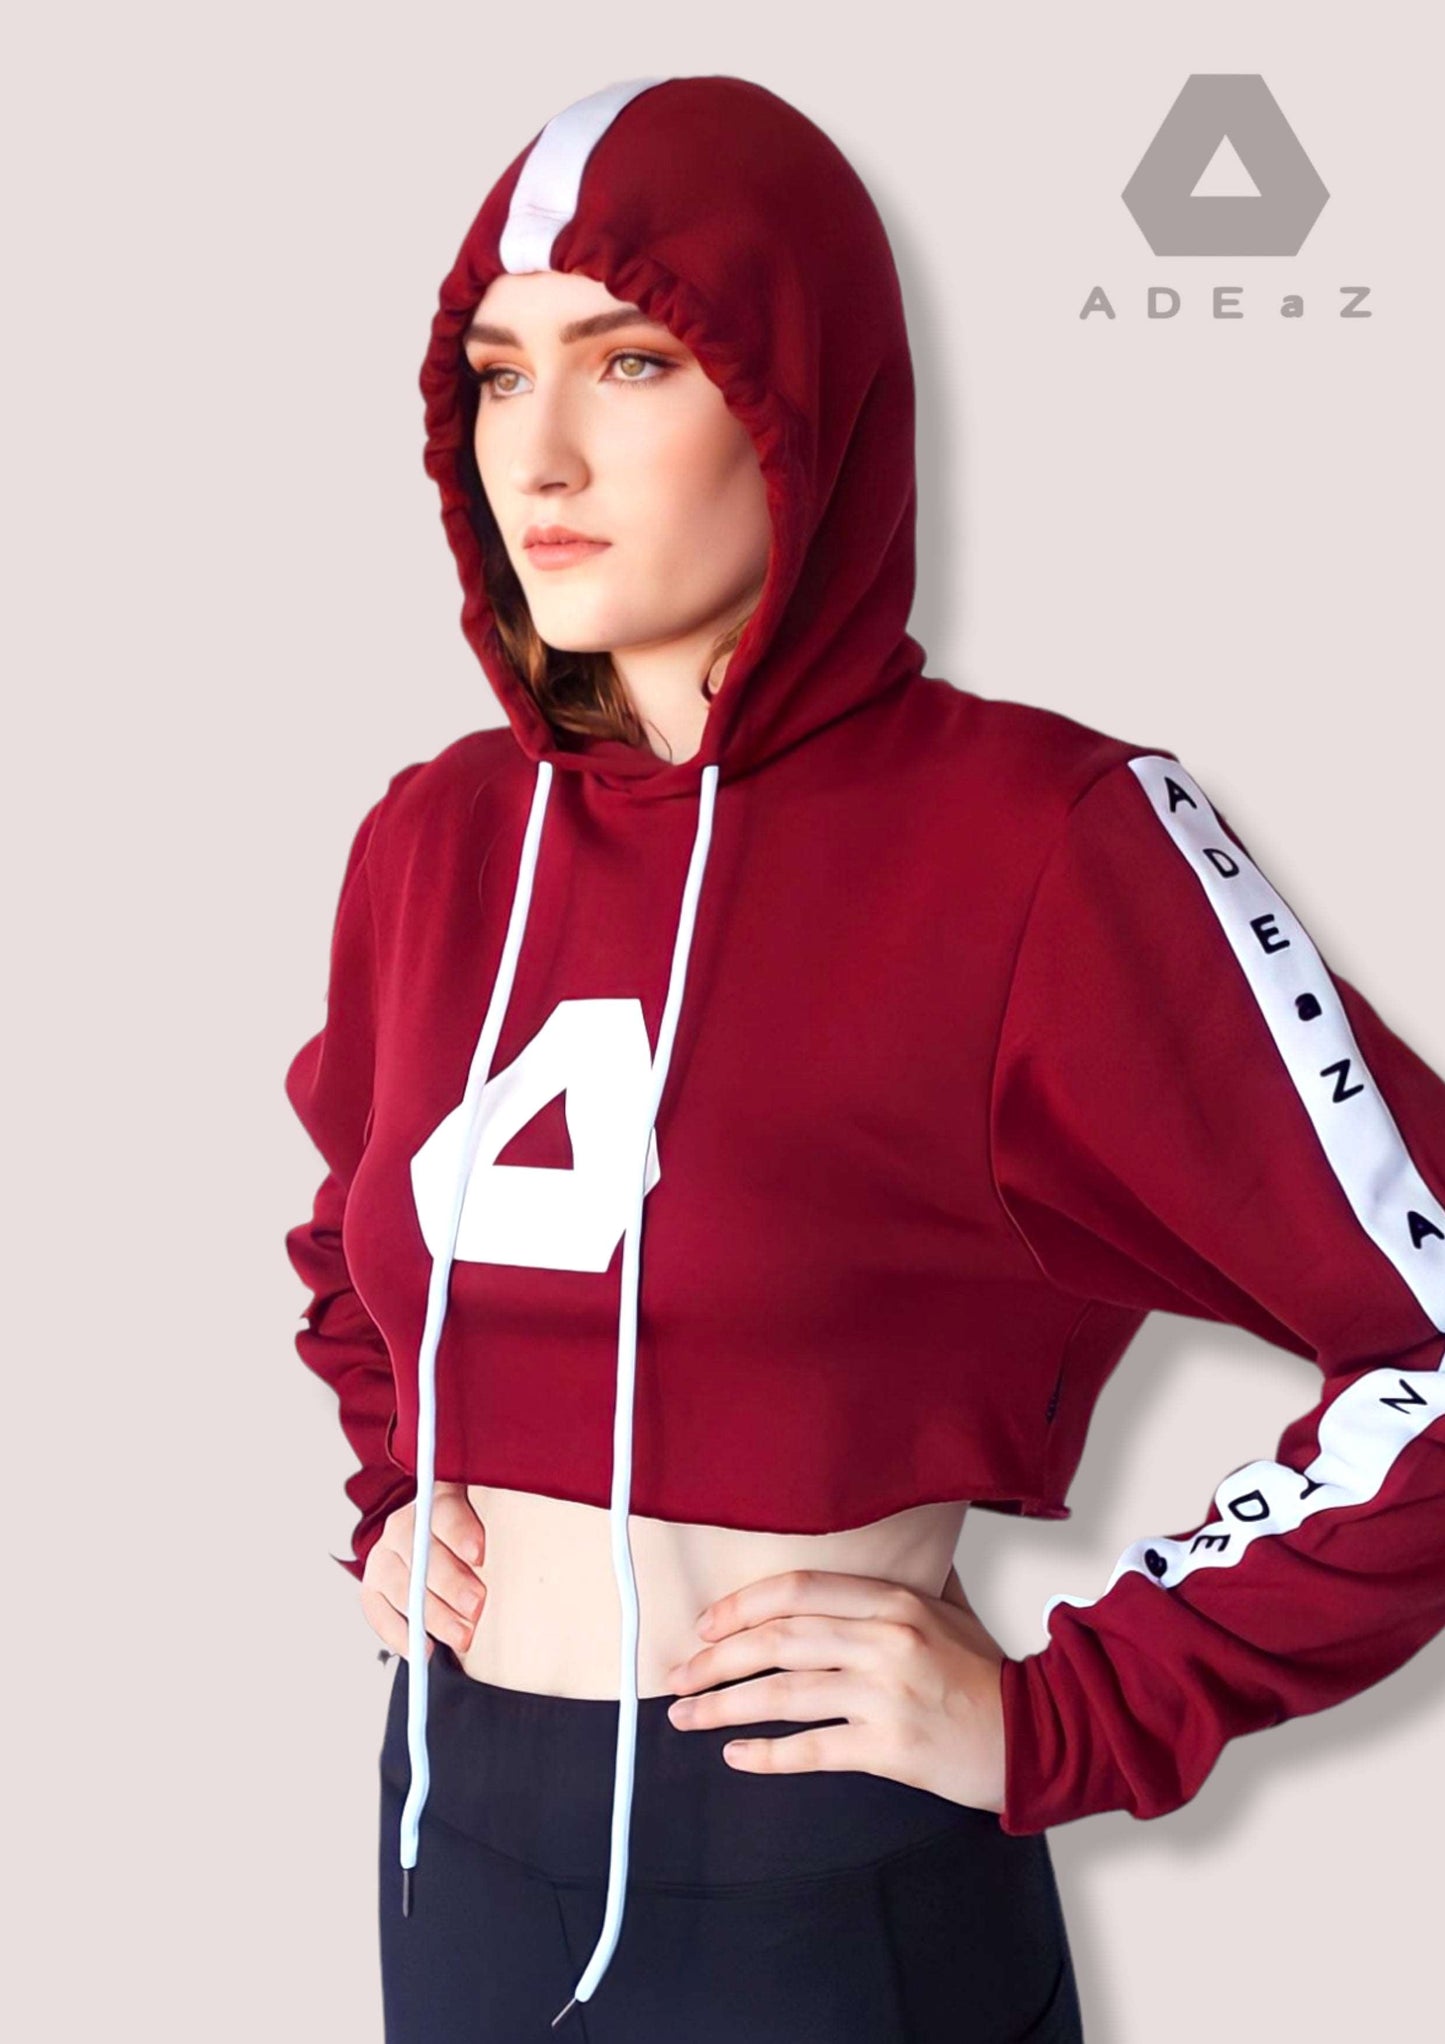  long-sleeve hoodie crop top with drawstrings, combining comfort and style in a fashionable ensemble